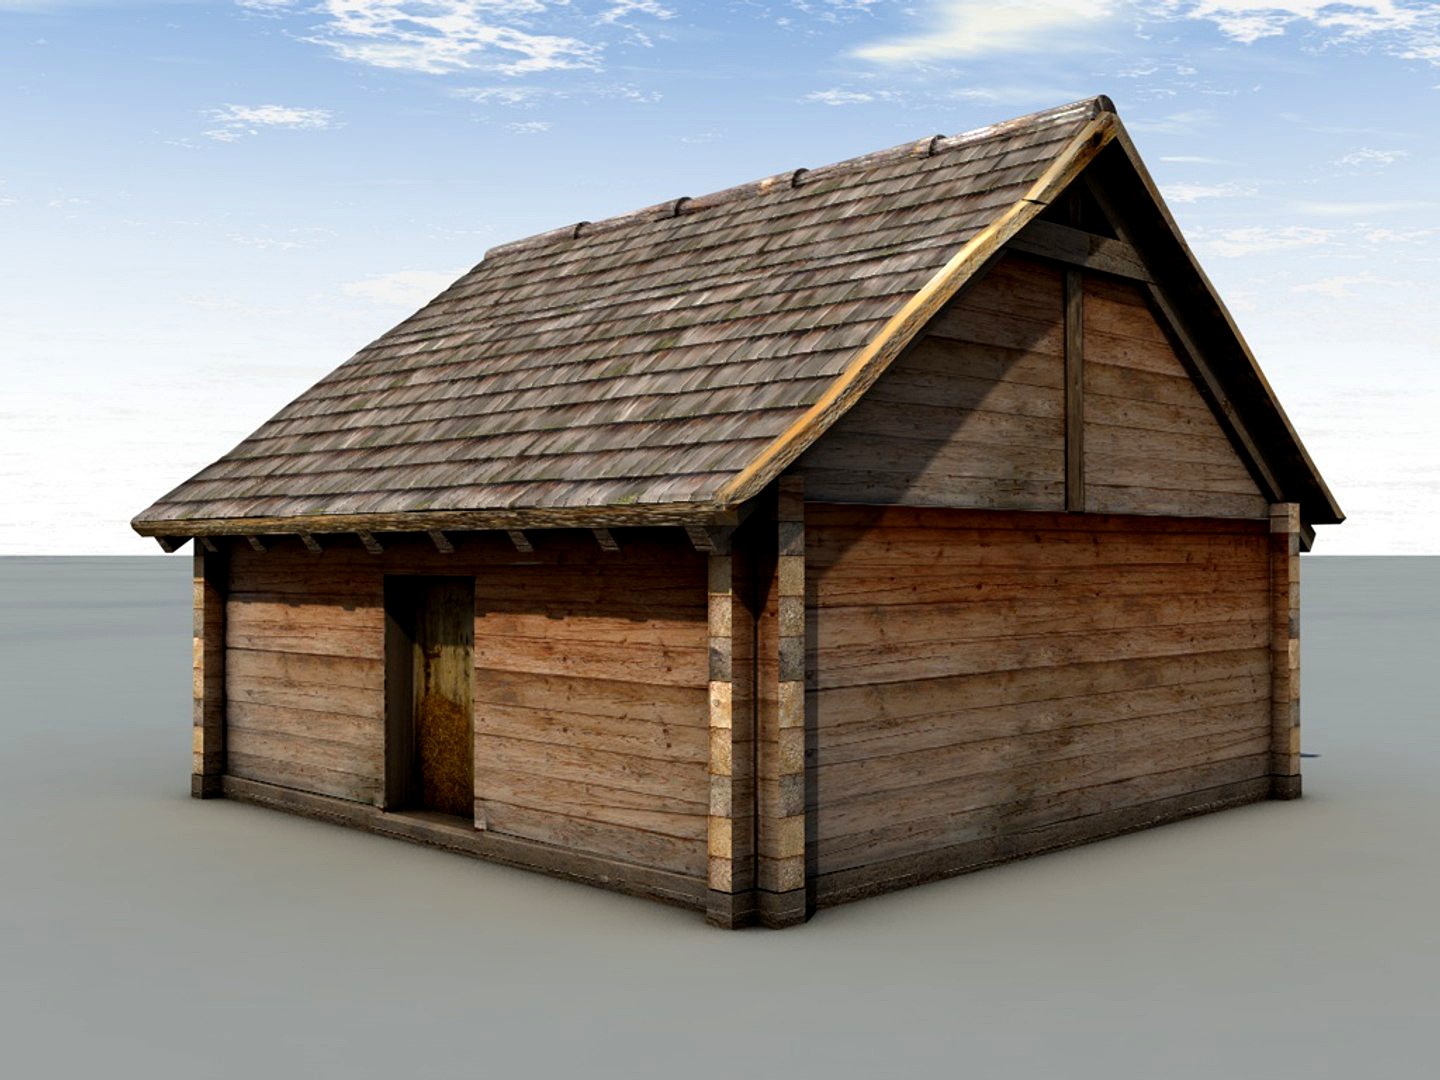 Middle Age Wooden Block House